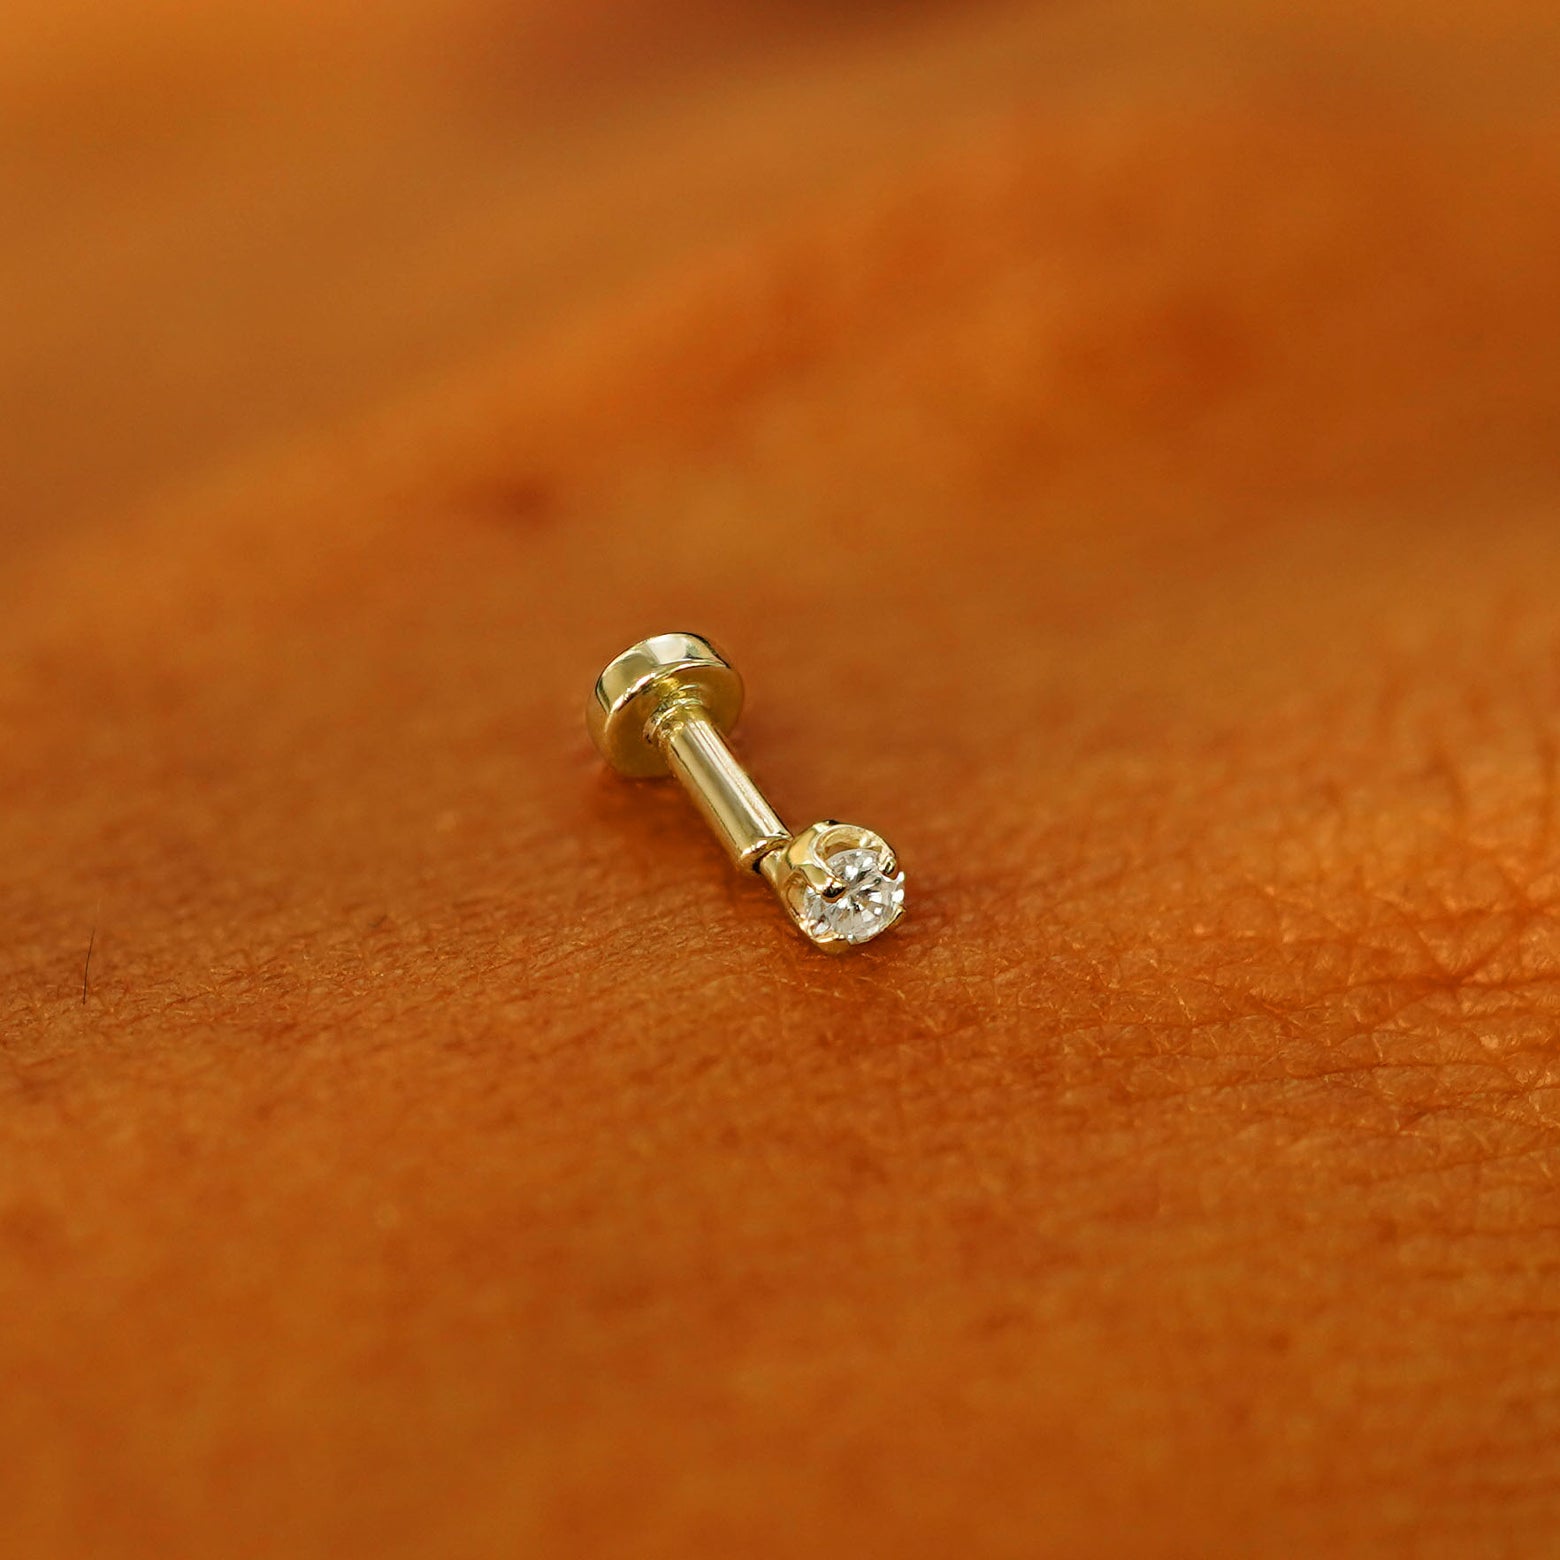 A solid 14k yellow gold 2mm Diamond Flatback Piercing resting on the back of a model's hand